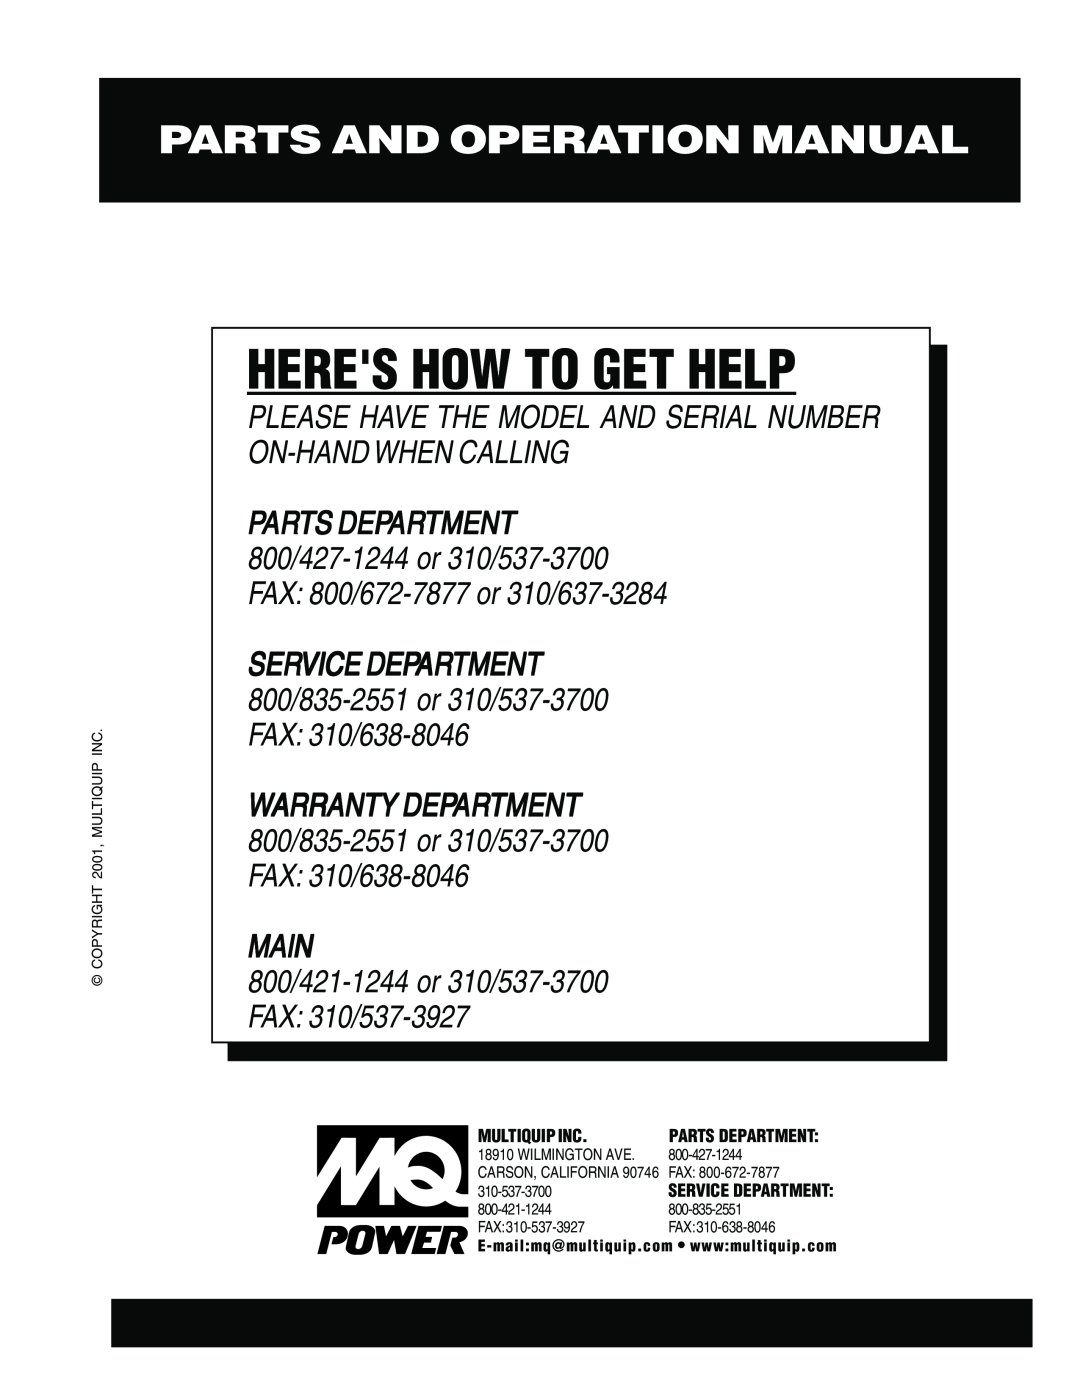 Multiquip DCA-60SS12 Heres How To Get Help, Parts And Operation Manual, Main, 800/421-1244or 310/537-3700FAX: 310/537-3927 